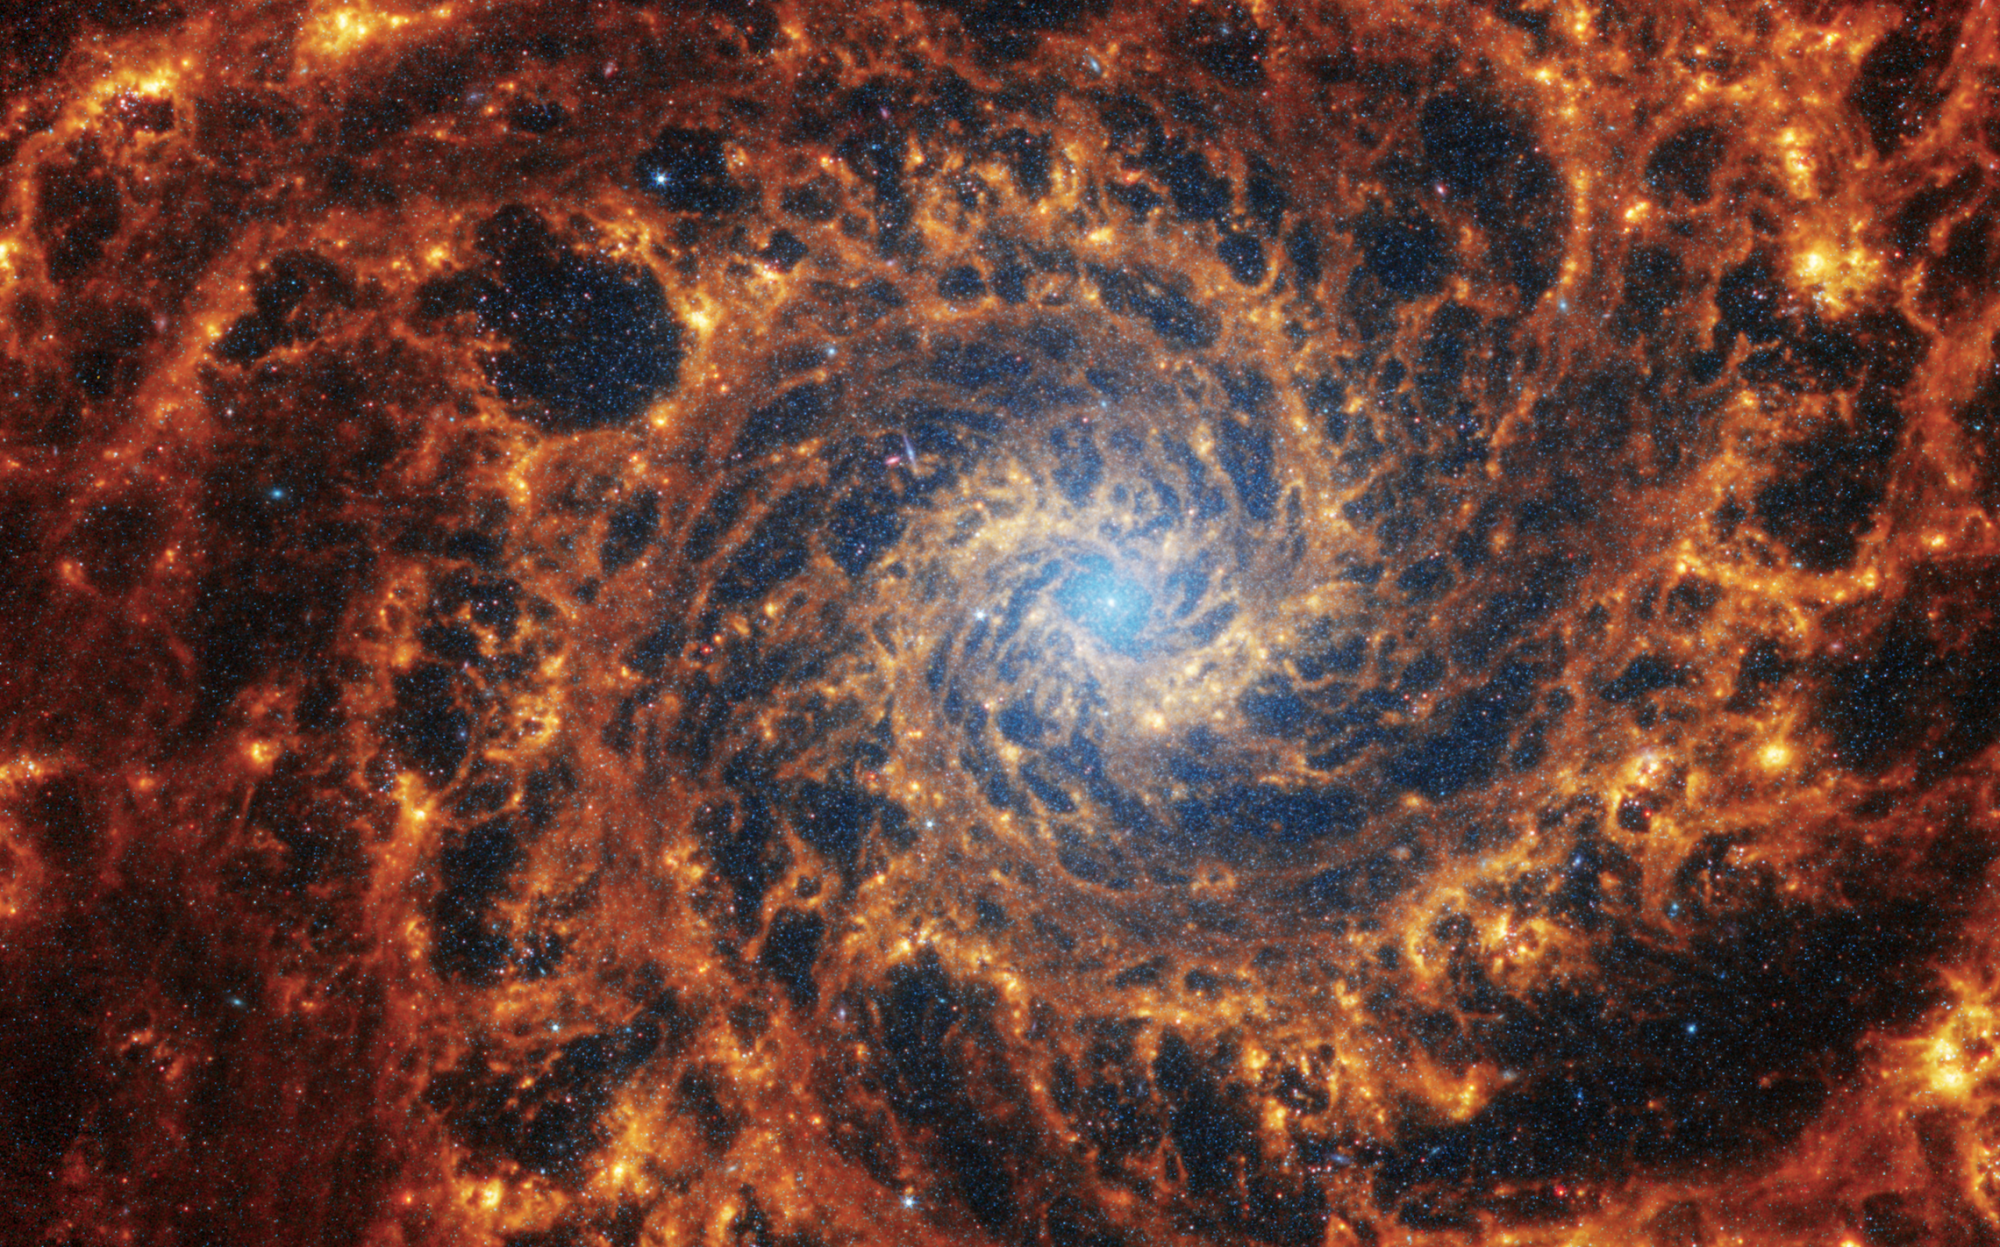 The James Webb Space Telescope observed 19 nearby face-on spiral galaxies in near- and mid-infrared light as part of its contributions to the Physics at High Angular resolution in Nearby GalaxieS (PHANGS) program. PHANGS also includes images and data from NASA’s Hubble Space Telescope, the Very Large Telescope’s Multi-Unit Spectroscopic Explorer, and the Atacama Large Millimeter/submillimeter Array, which included observations taken in ultraviolet, visible, and radio light. NASA, ESA, CSA, STScI, Janice Lee (STScI), Thomas Williams (Oxford), PHANGS Team, Elizabeth Wheatley (STScI)